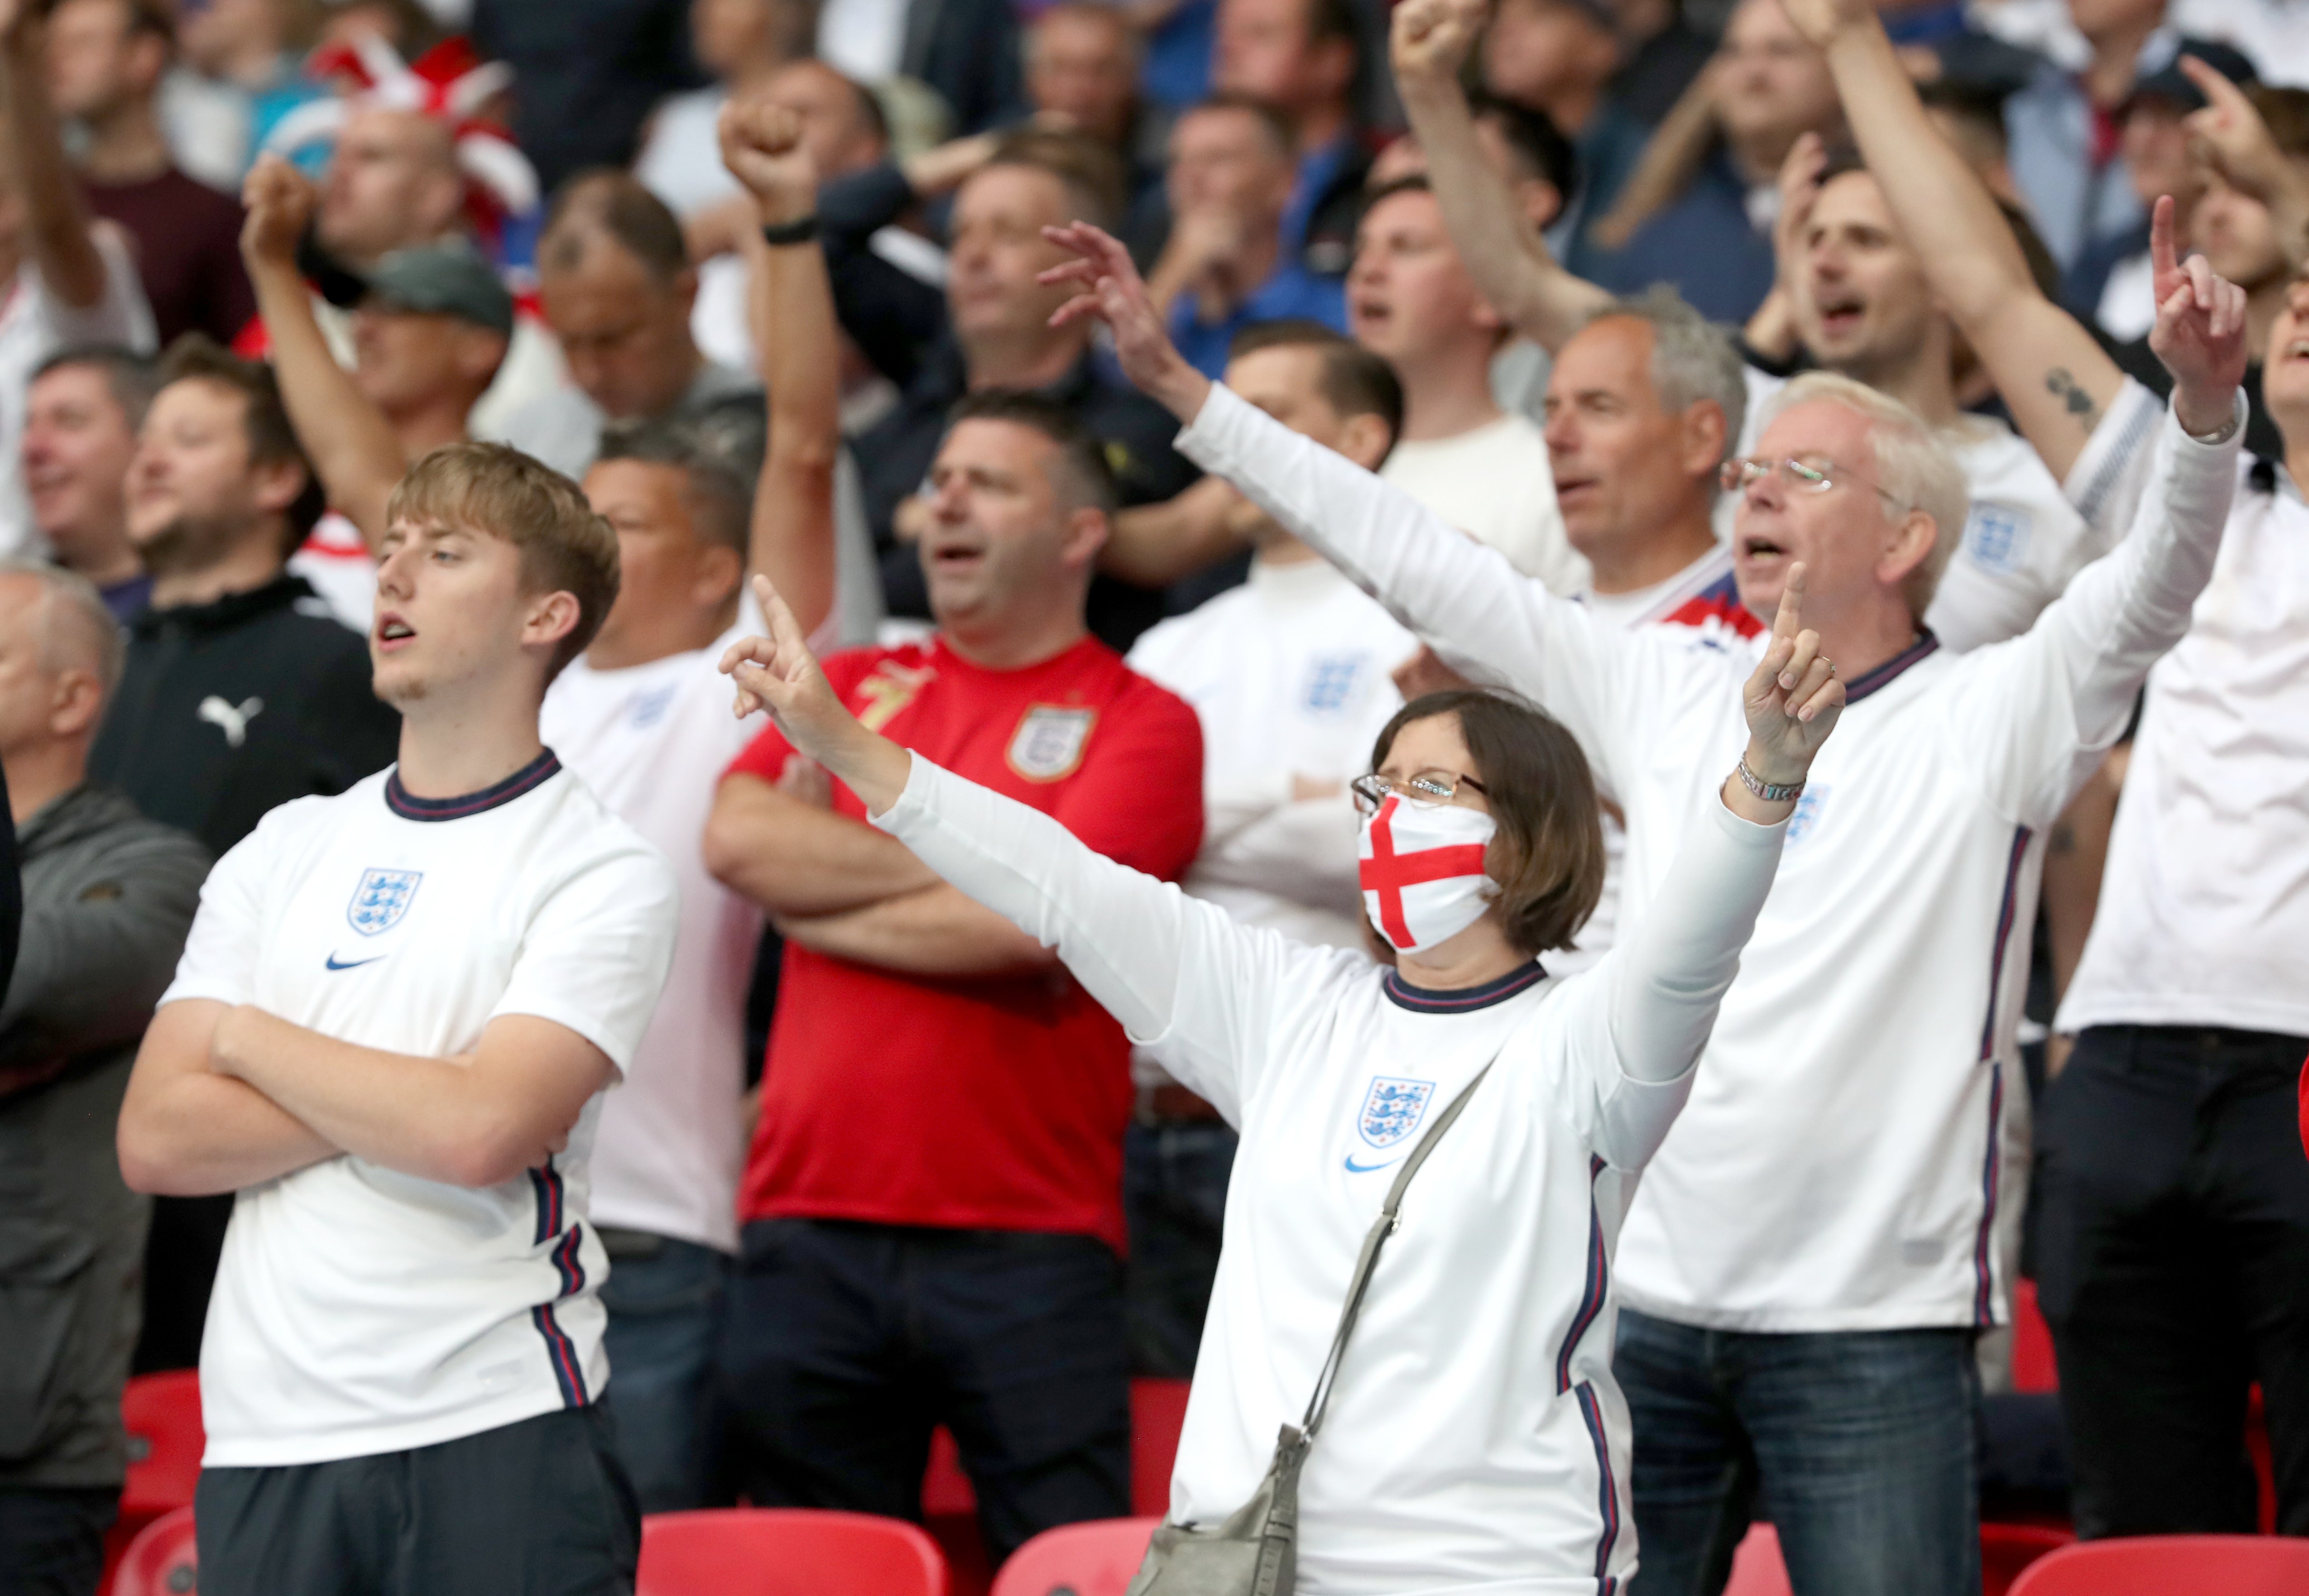 England fans cheered on the team at Wembley for the Germany game, but support is set to be limited to expatriates for the quarter-final in Rome